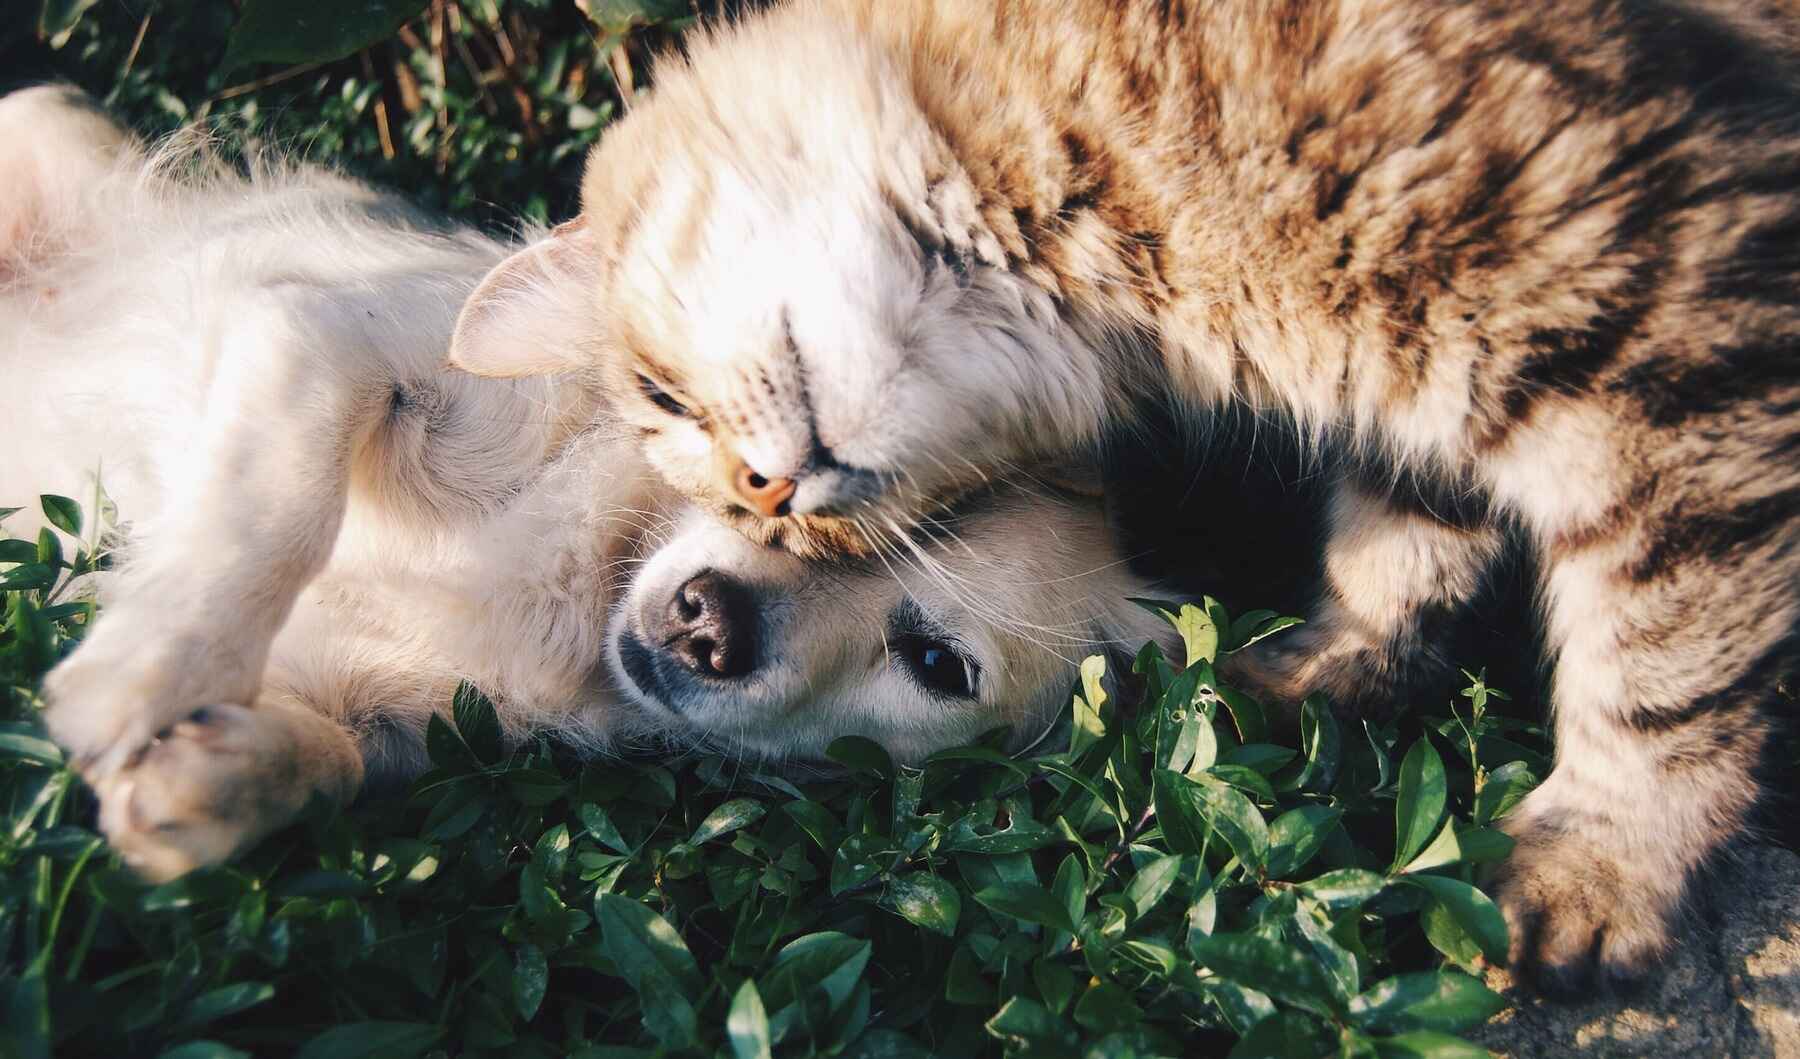 Dog and cat cuddling together on grass